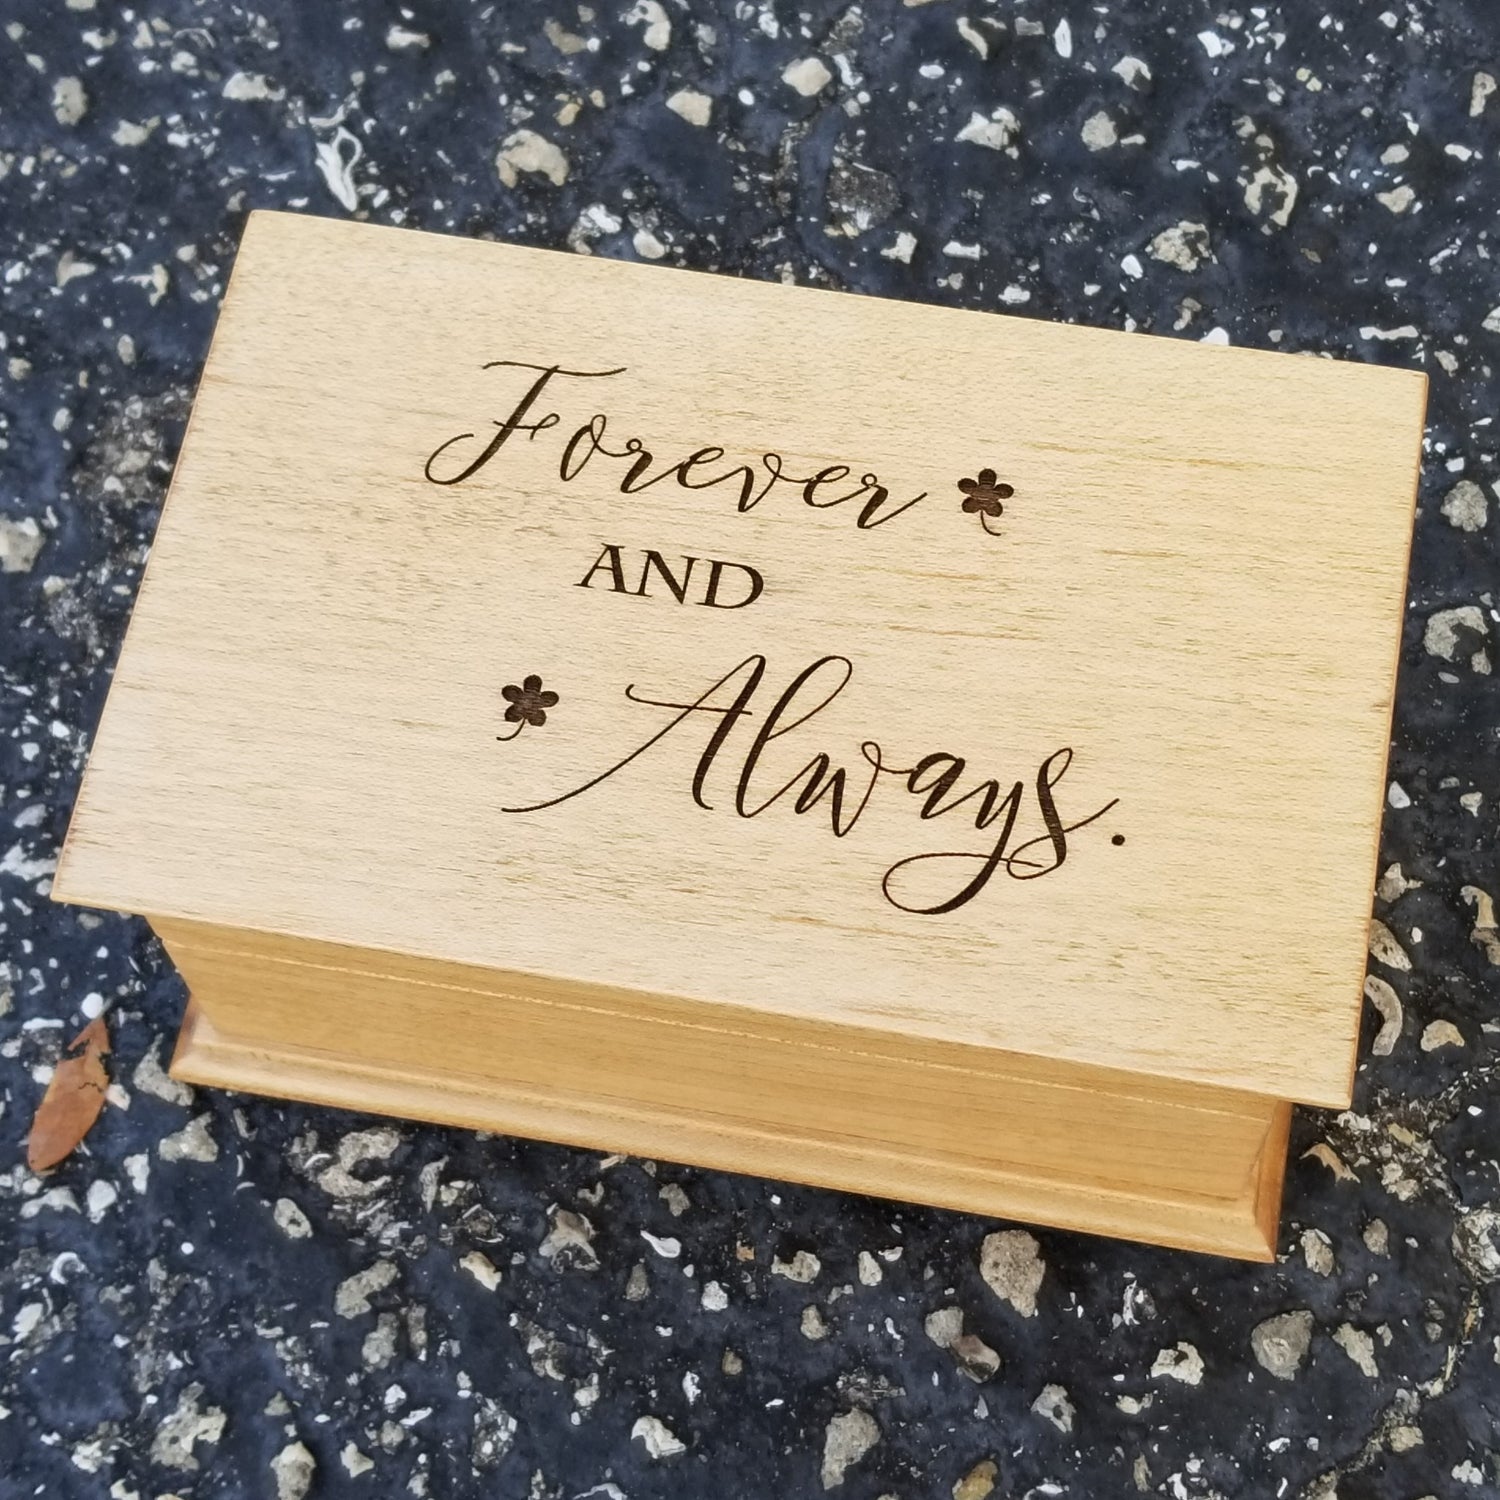 jewelry box Forever and Always engraved on top